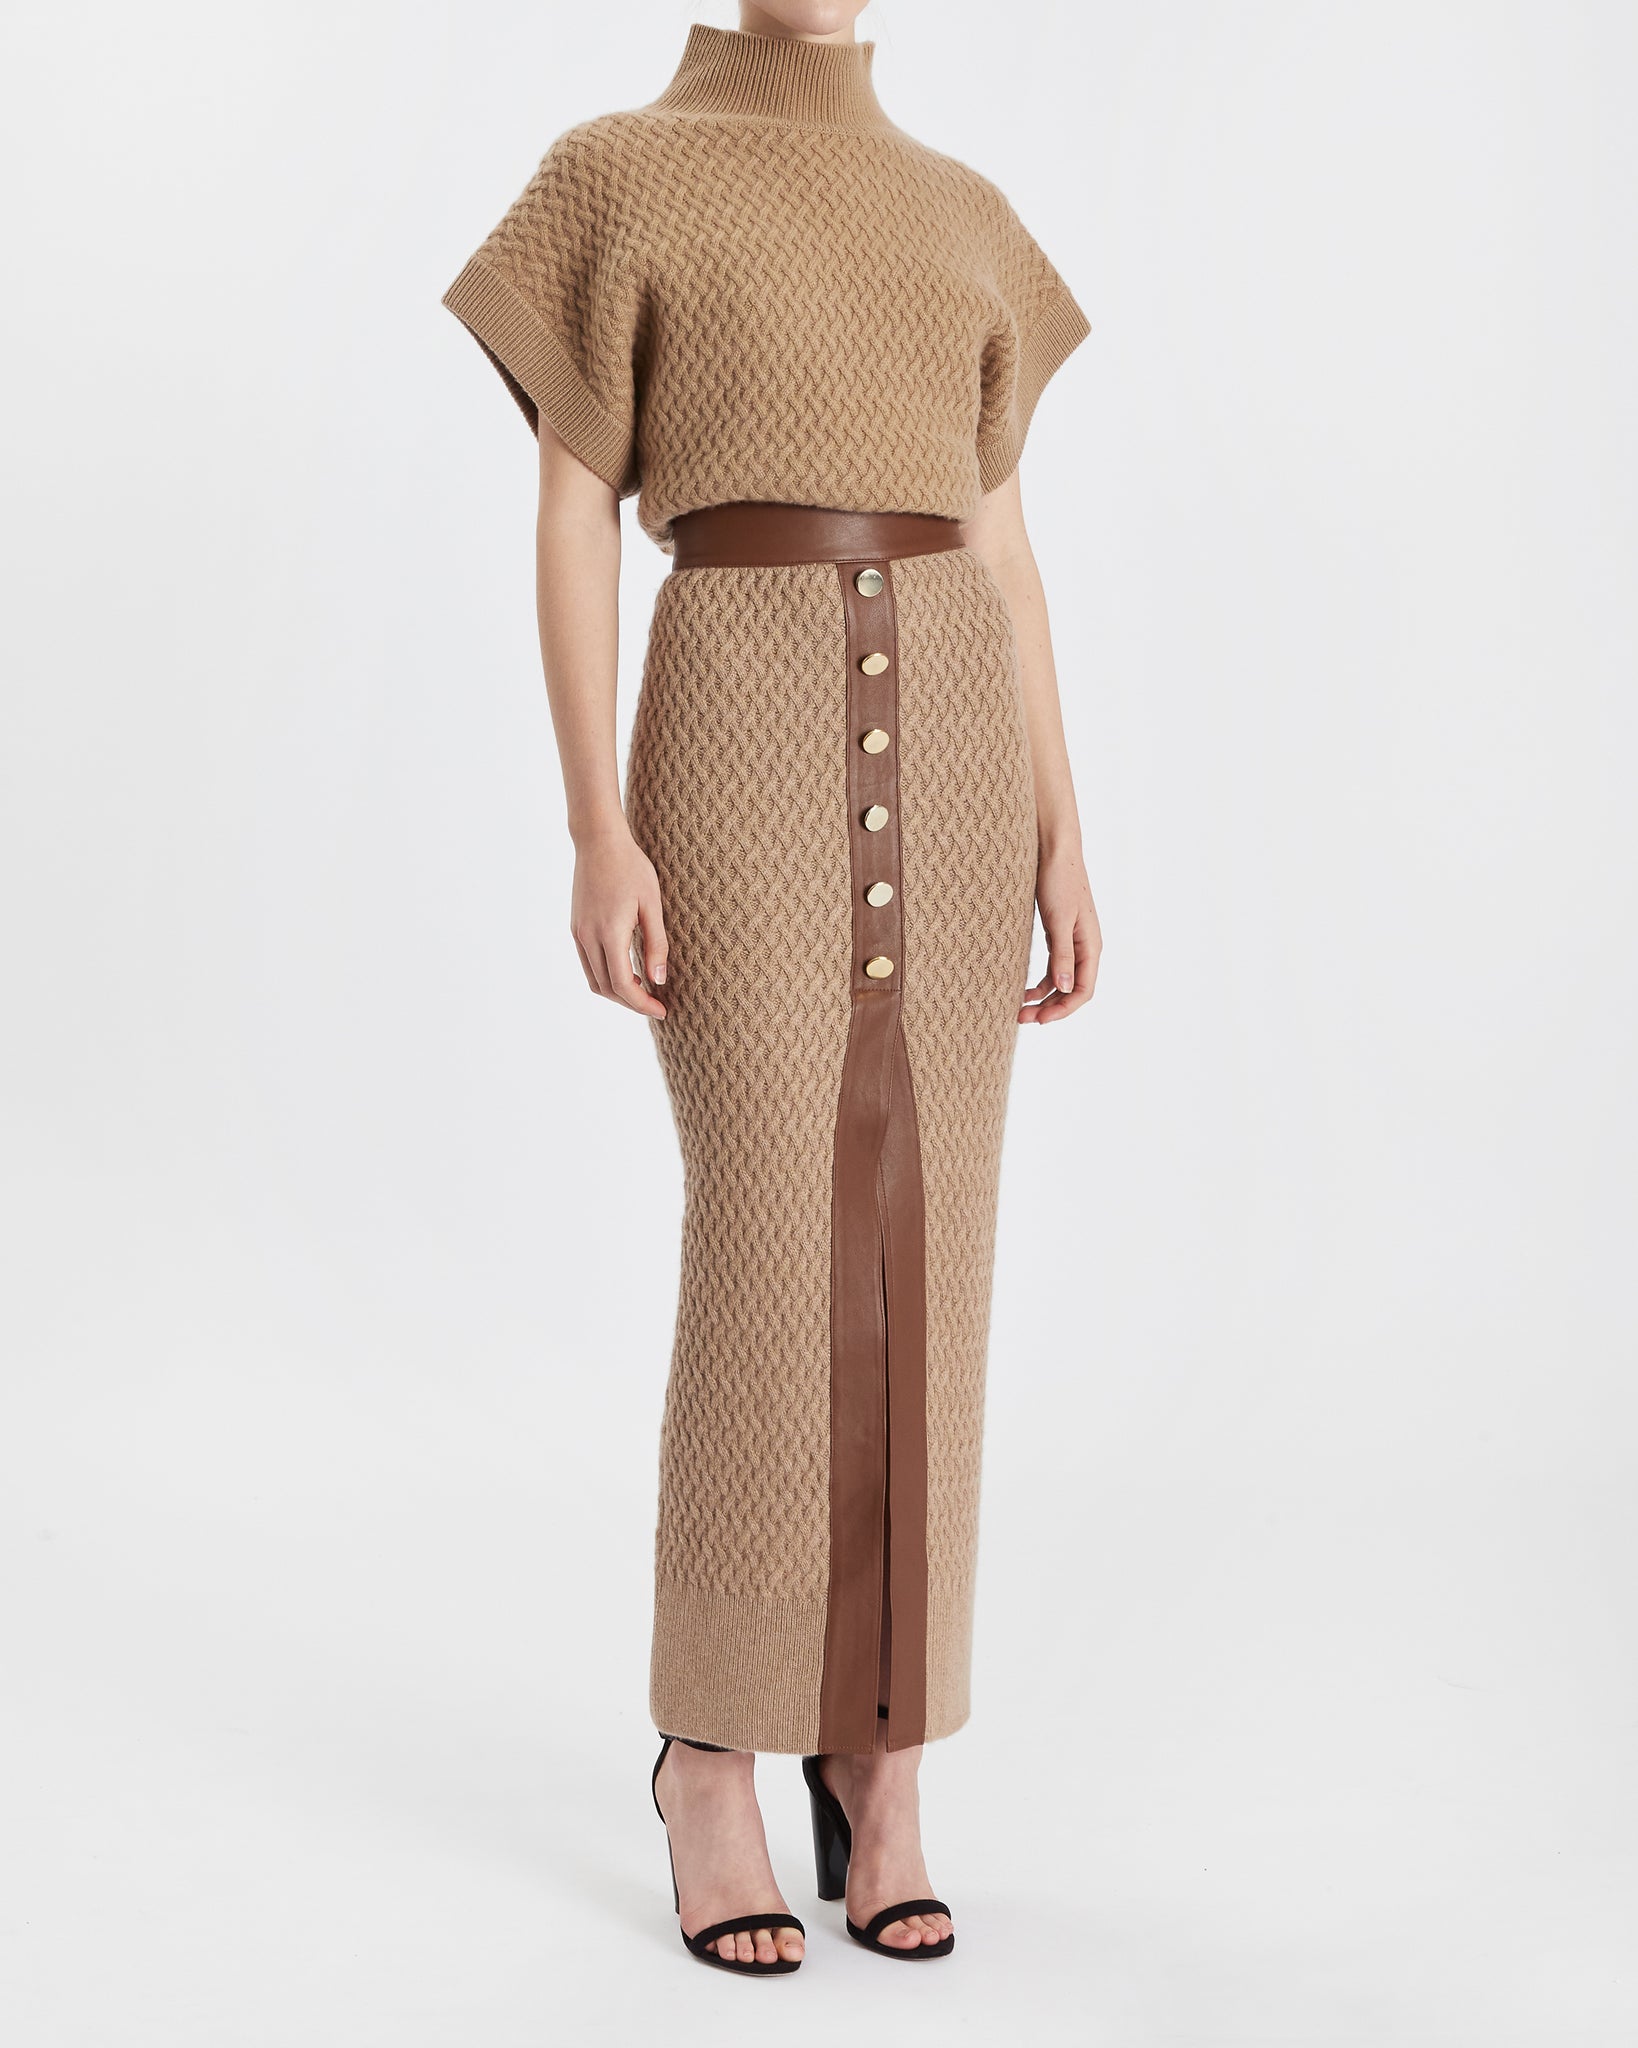 Remi LEATHER CASHMERE SKIRT - BEIGE/BROWN